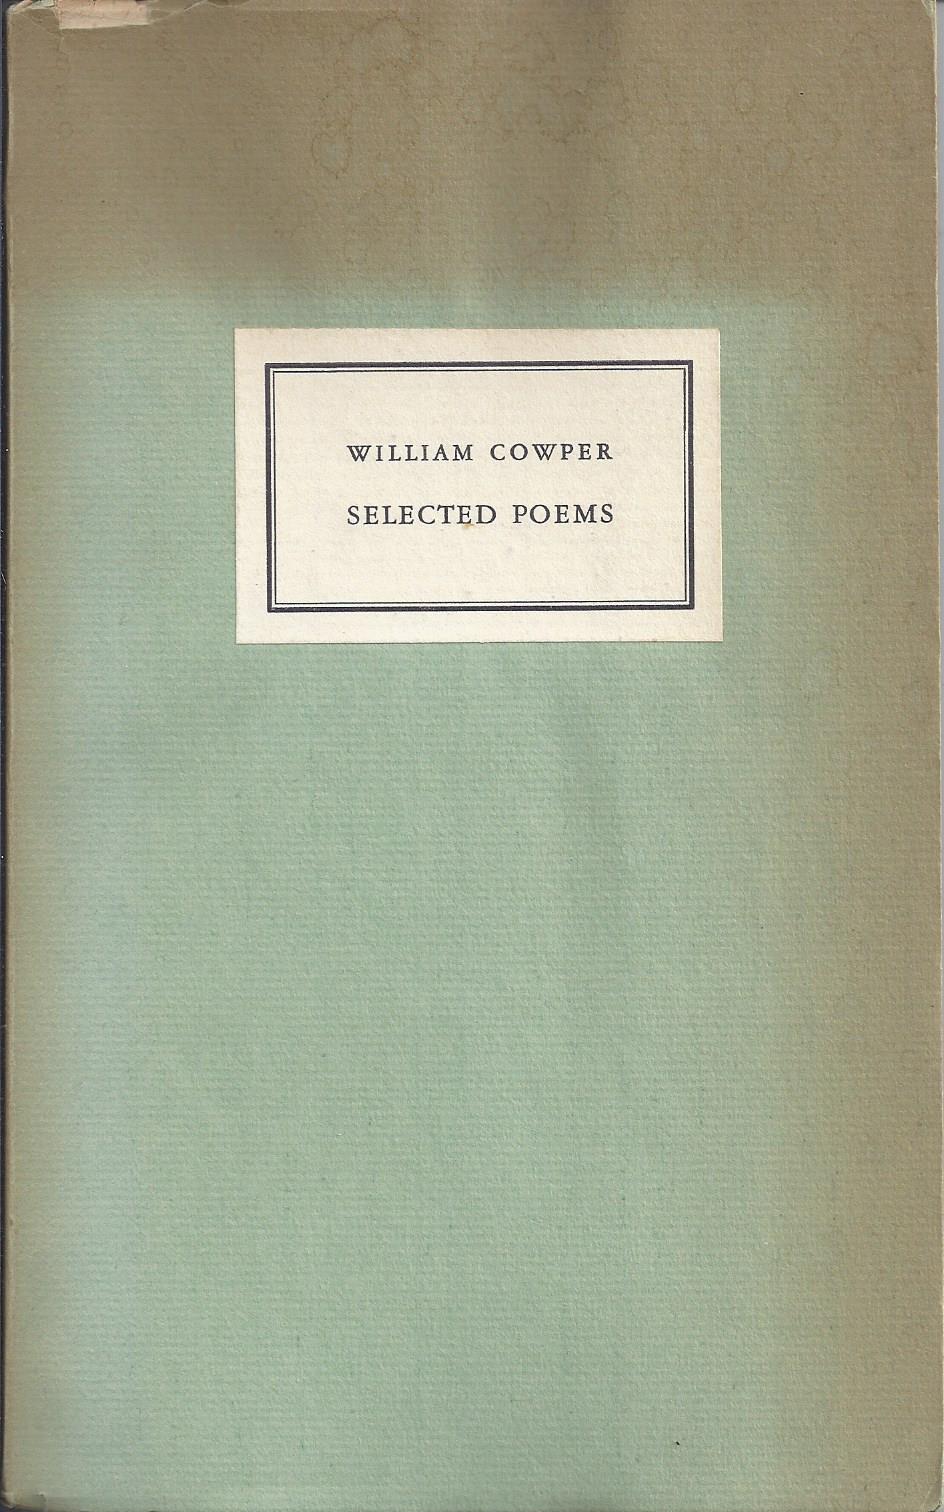 COWPER, WILLIAM - Selected Poems